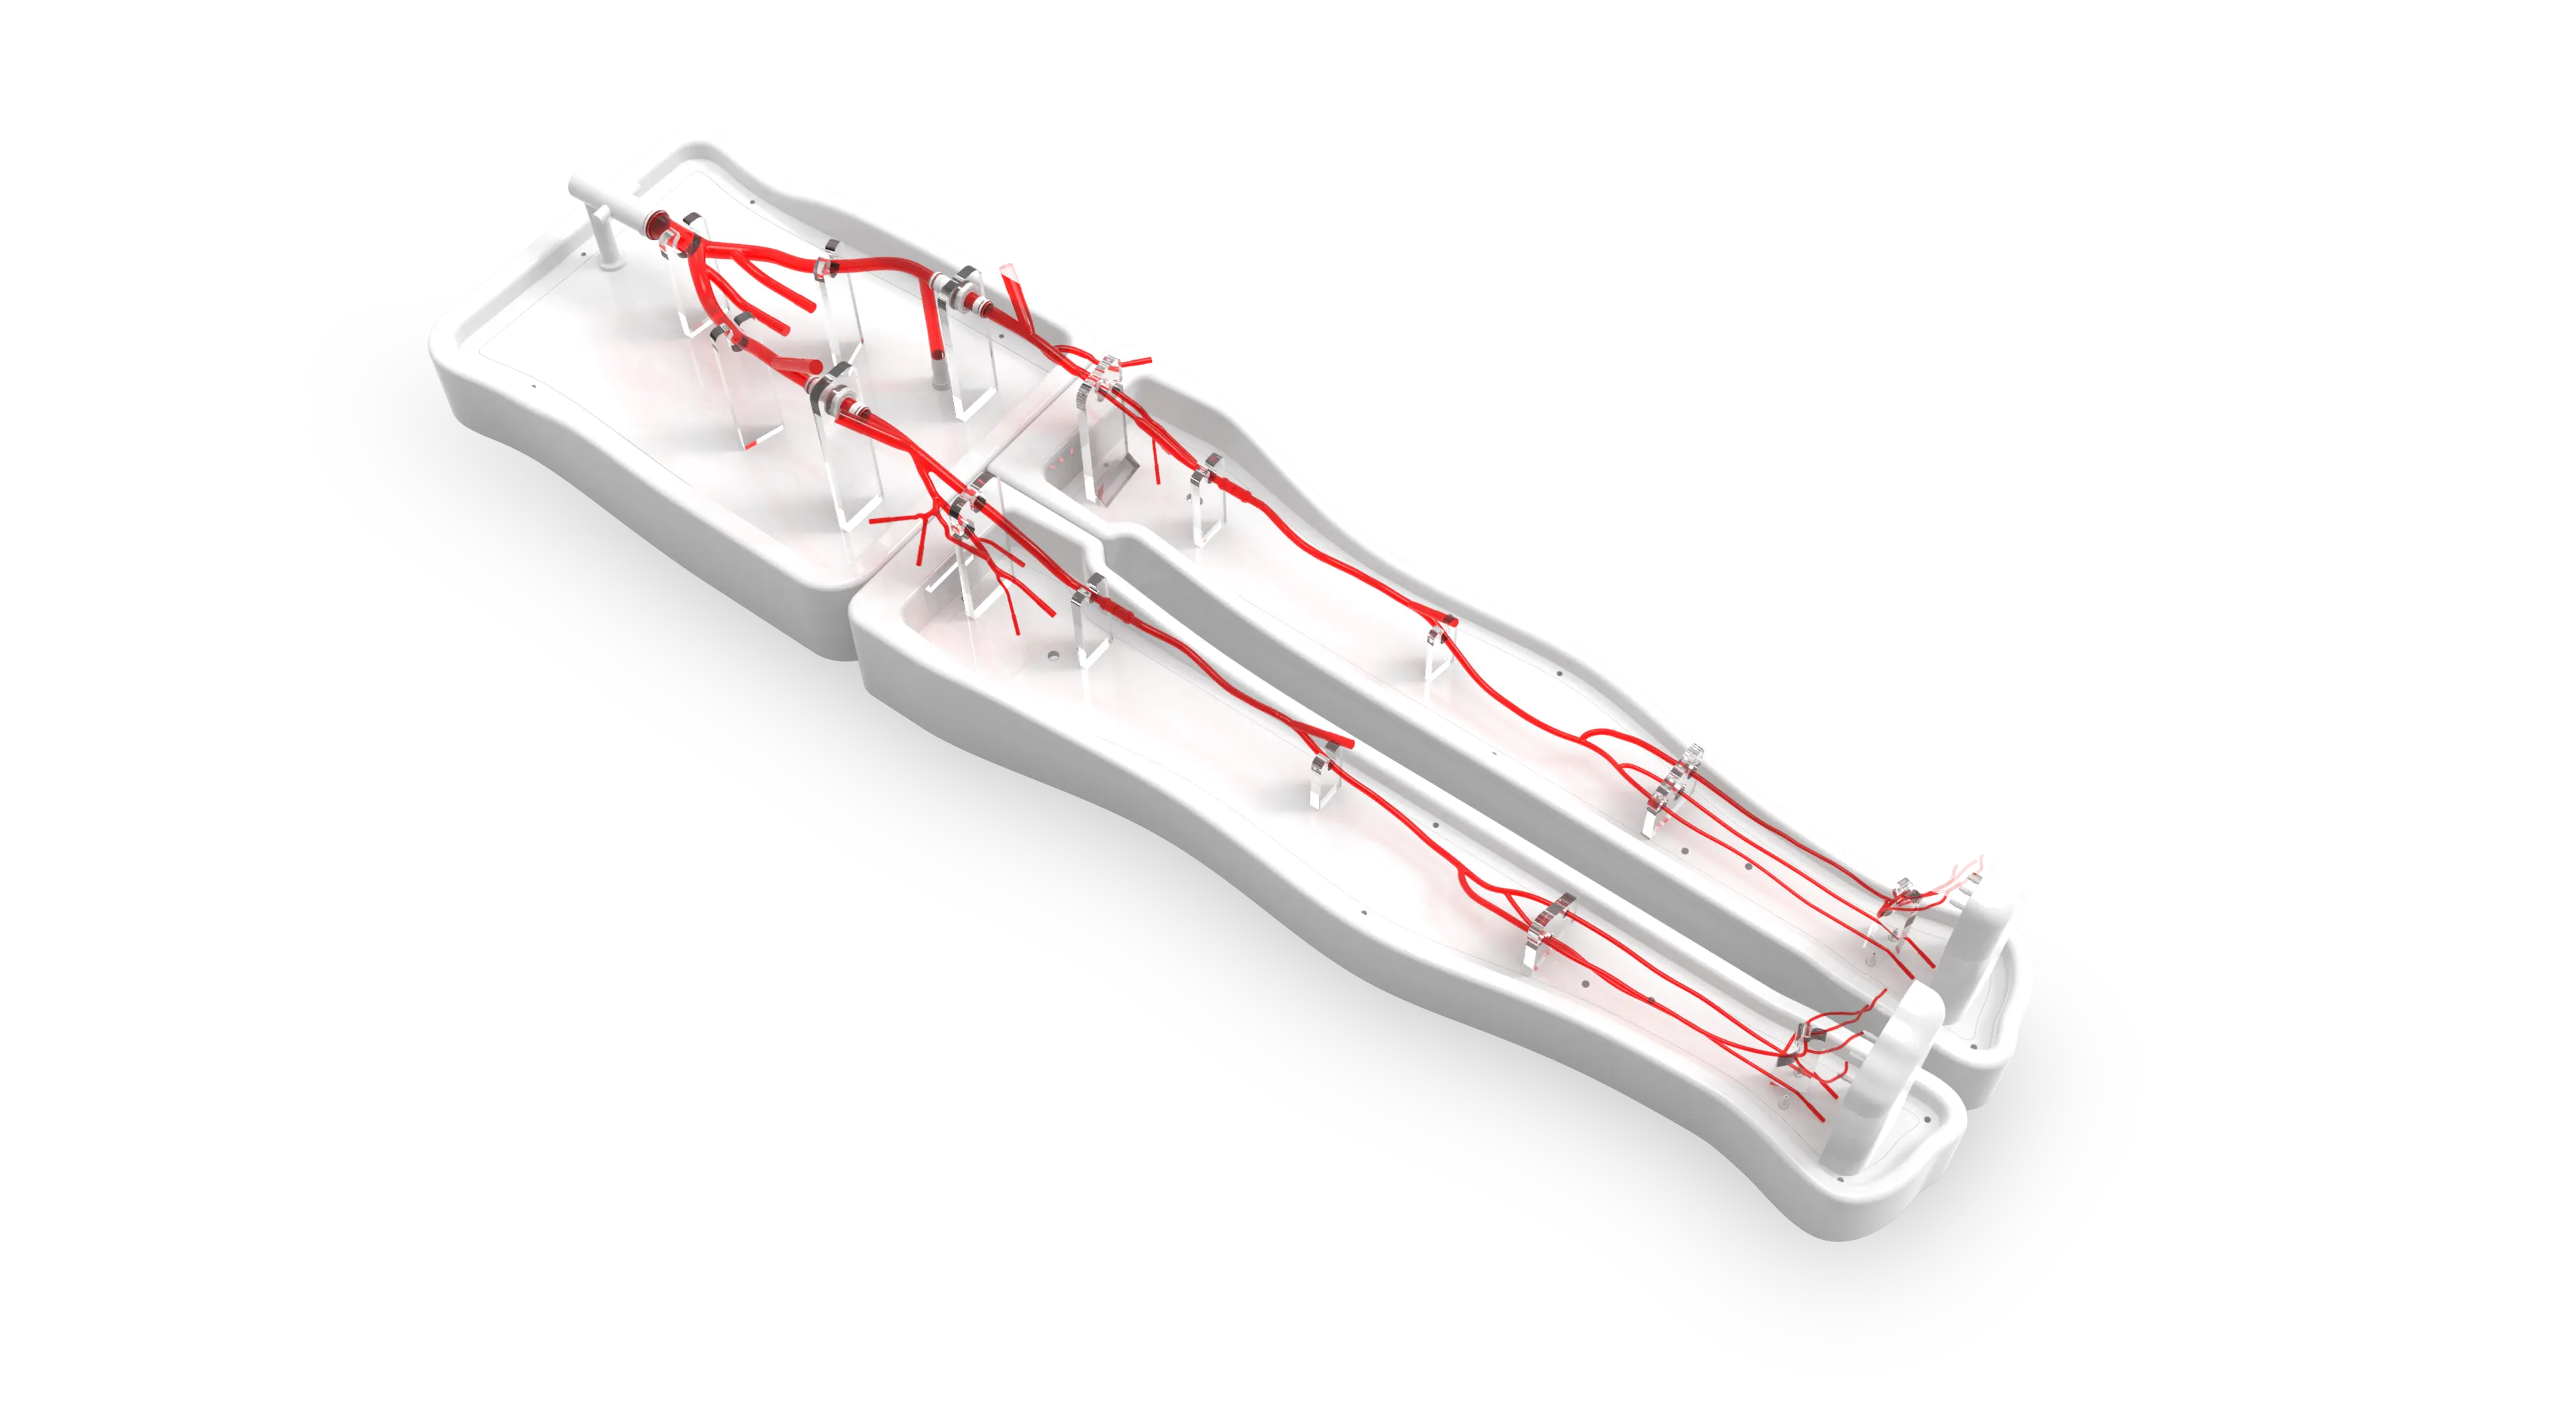 Drawing of Lower Extremity Artery Simulation Model